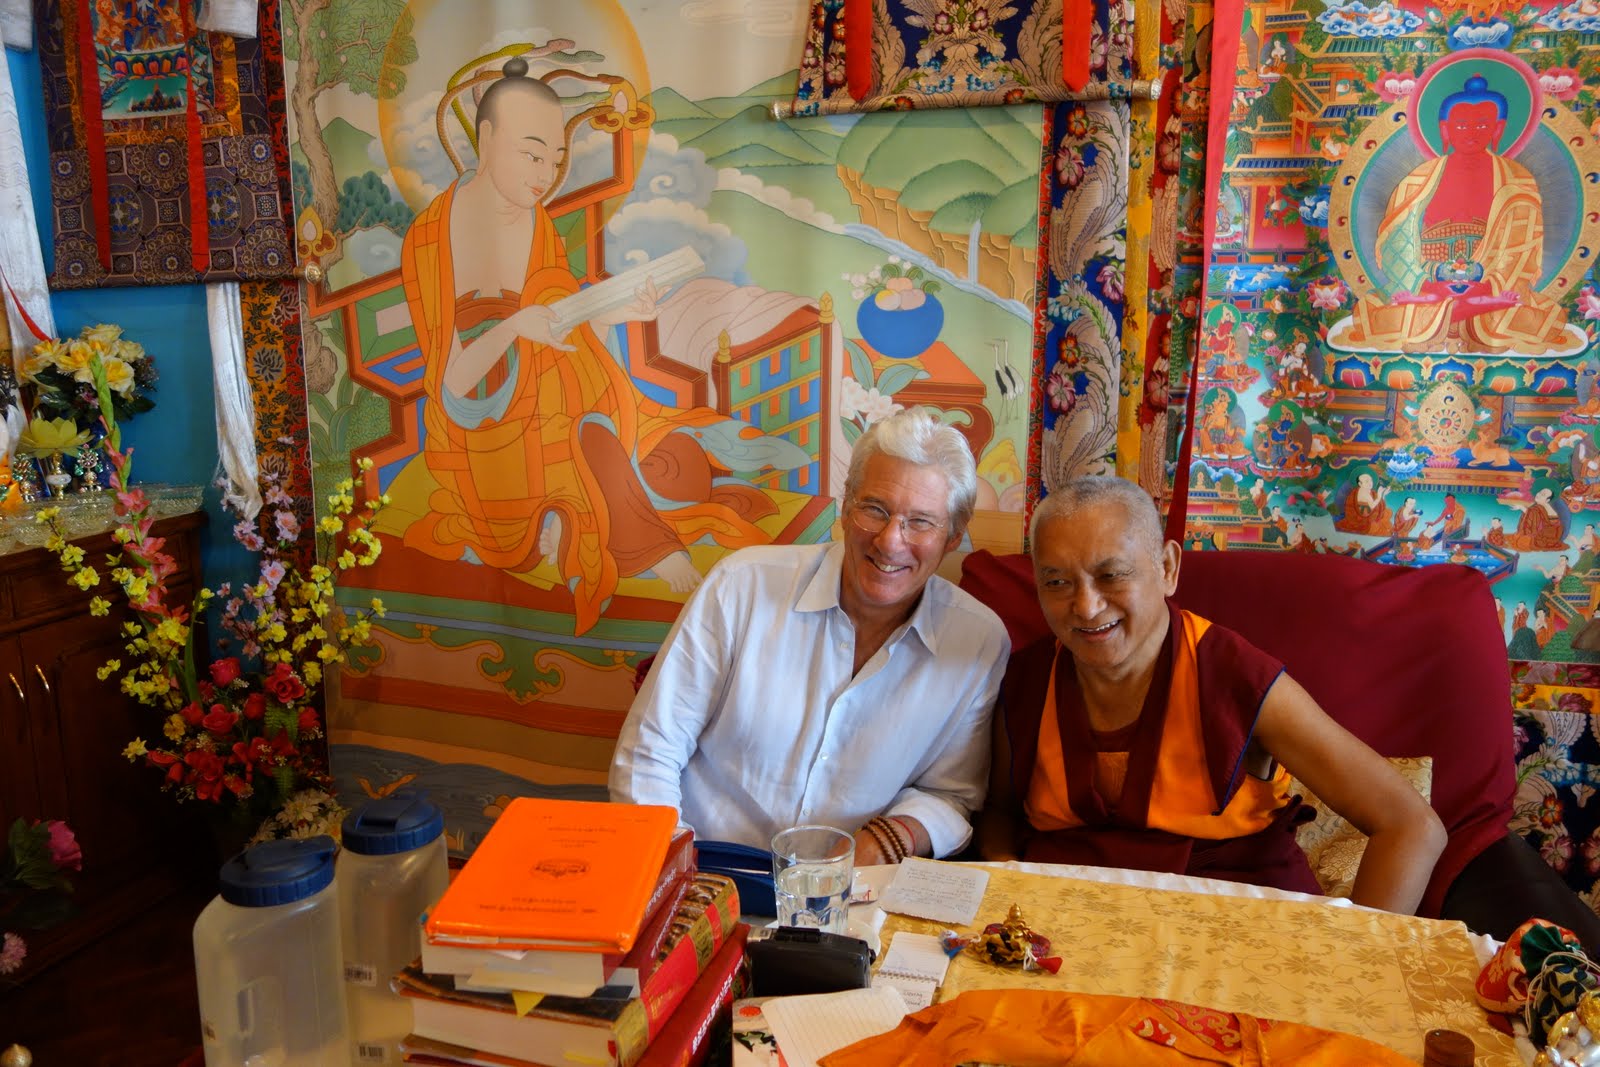 Rinpoche and Richard Gere in Kopan where they had lunch together. Rinpoche was telling lots of old stories about meditators & Dharma practitioners. The stories went on for a long time, interspersed with lots of laughter. Photo by Ven. Roger Kunsang.